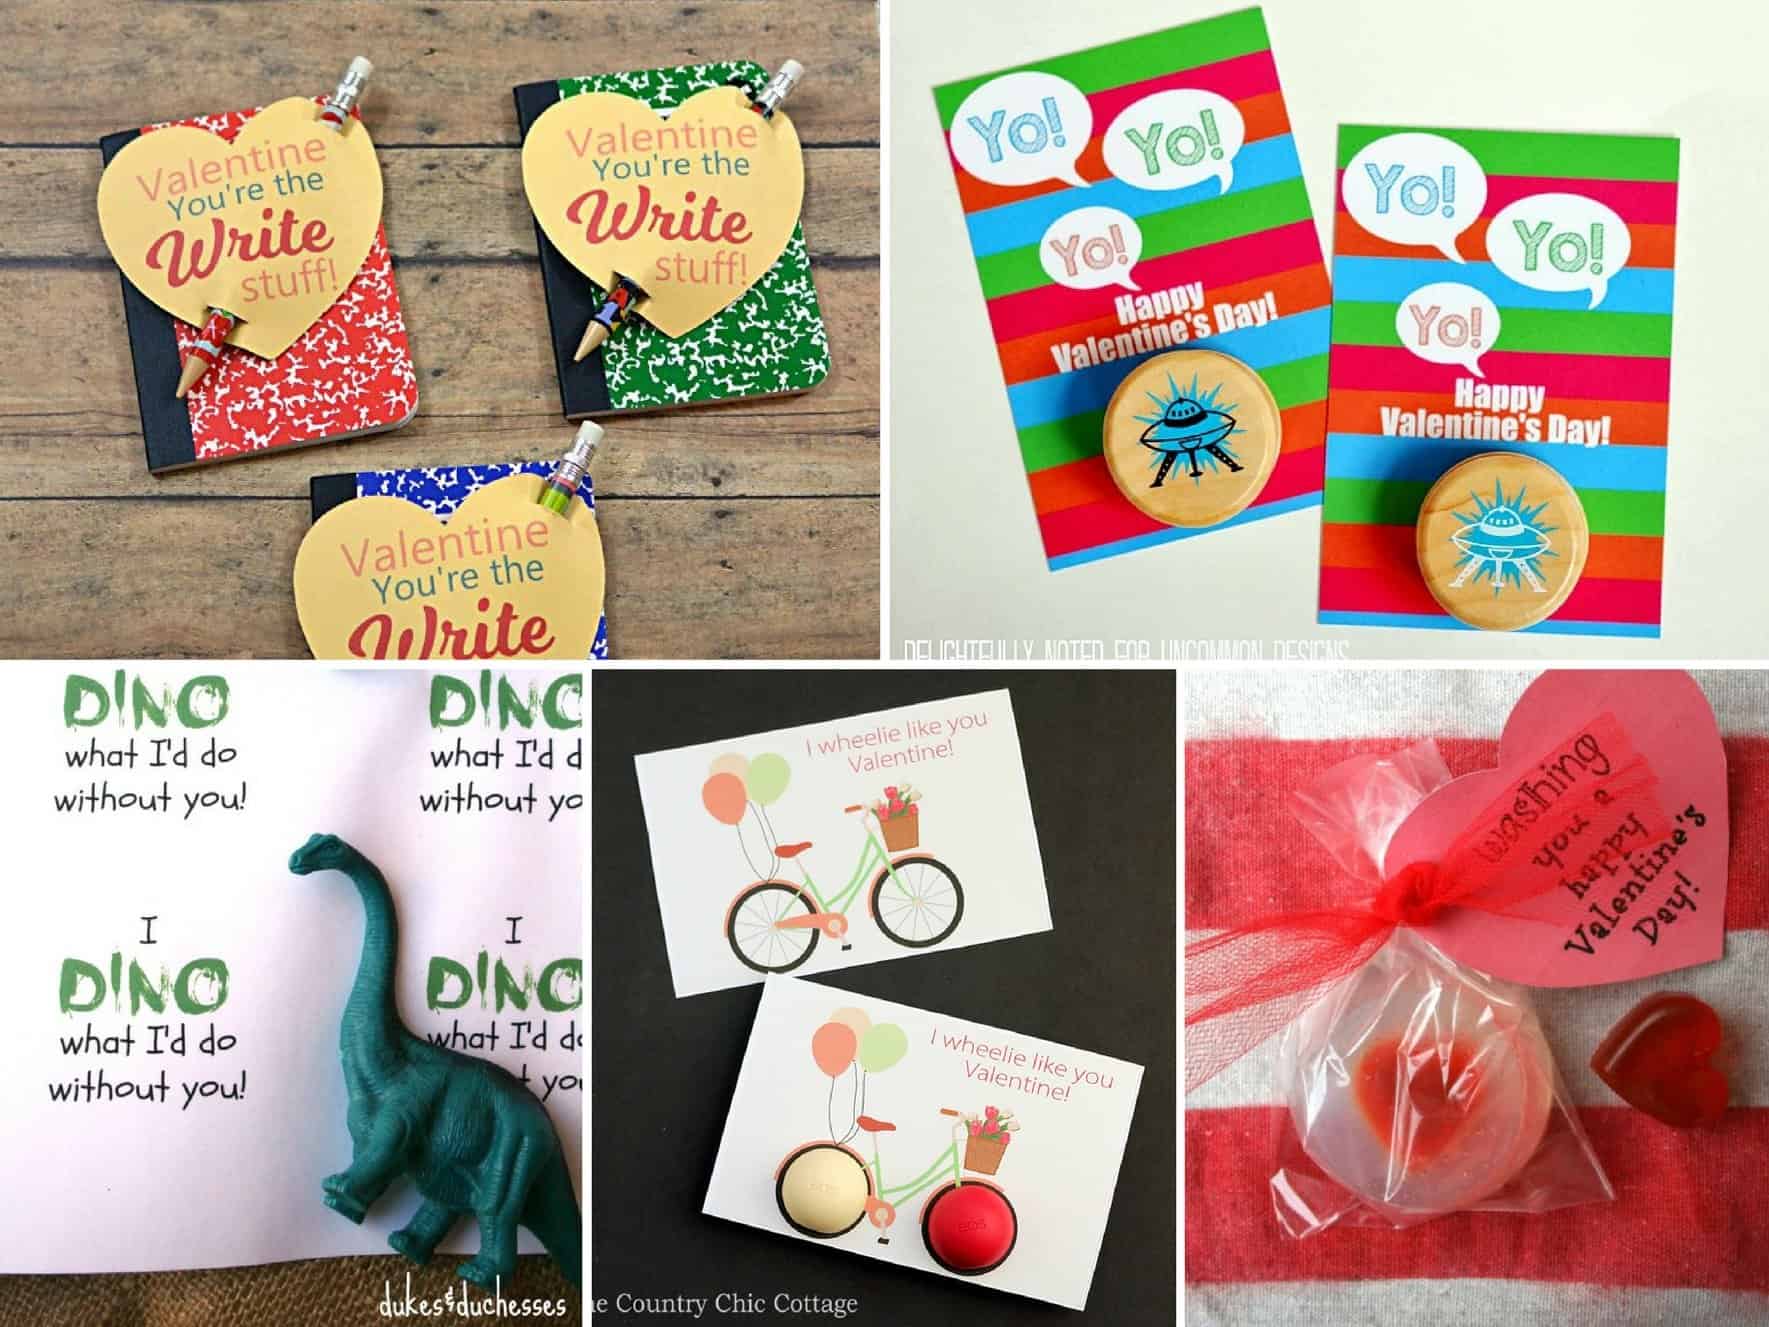 Non-Candy Valentine's Ideas for Kids to Take to School